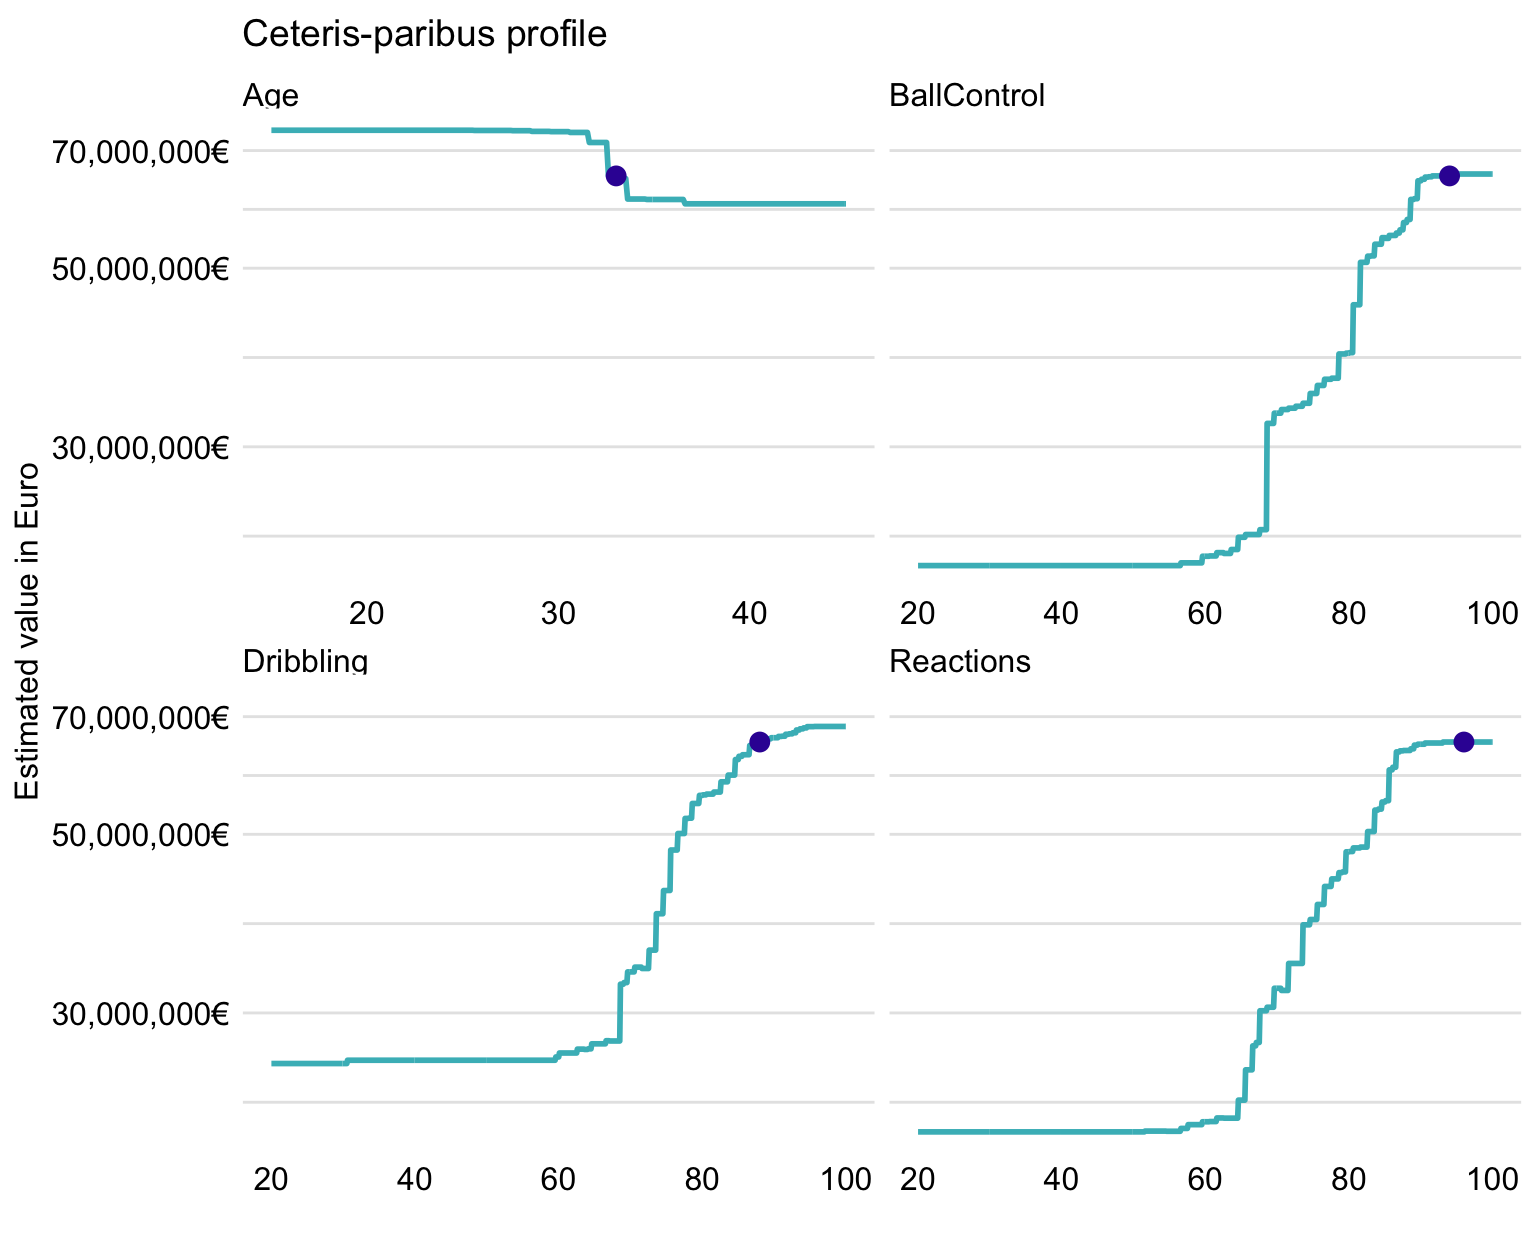 Ceteris-paribus profiles for Cristiano Ronaldo for four selected variables and the random forest model.